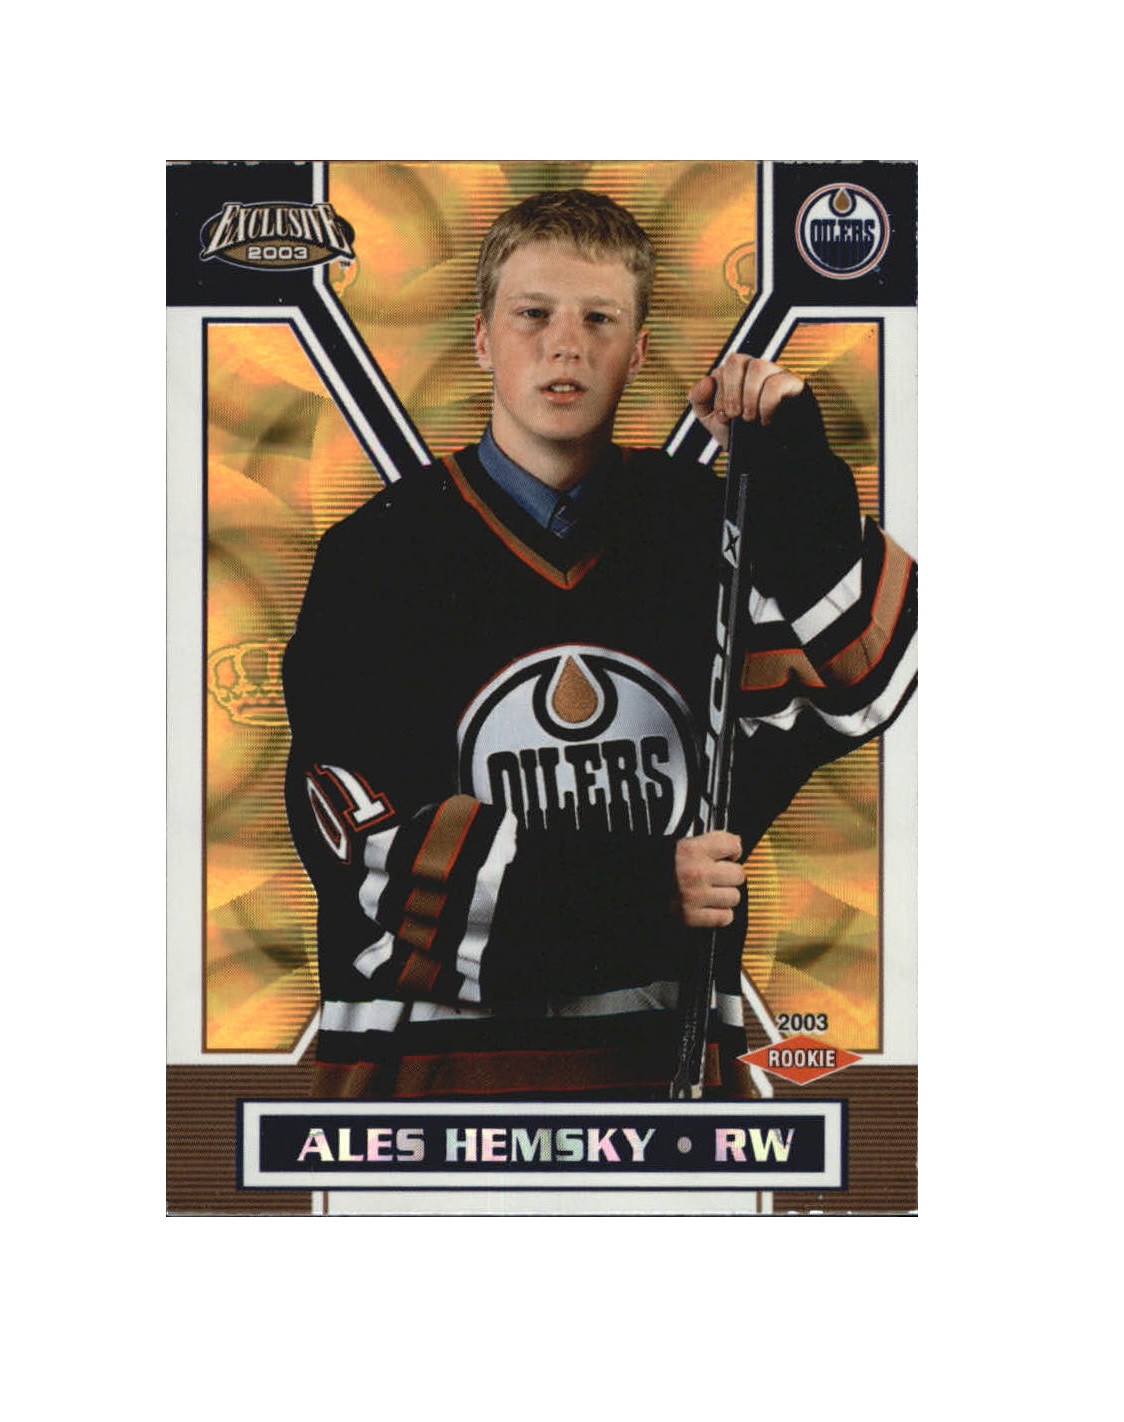 2002-03 Pacific Exclusive Gold #178 Ales Hemsky (20-X217-OILERS)